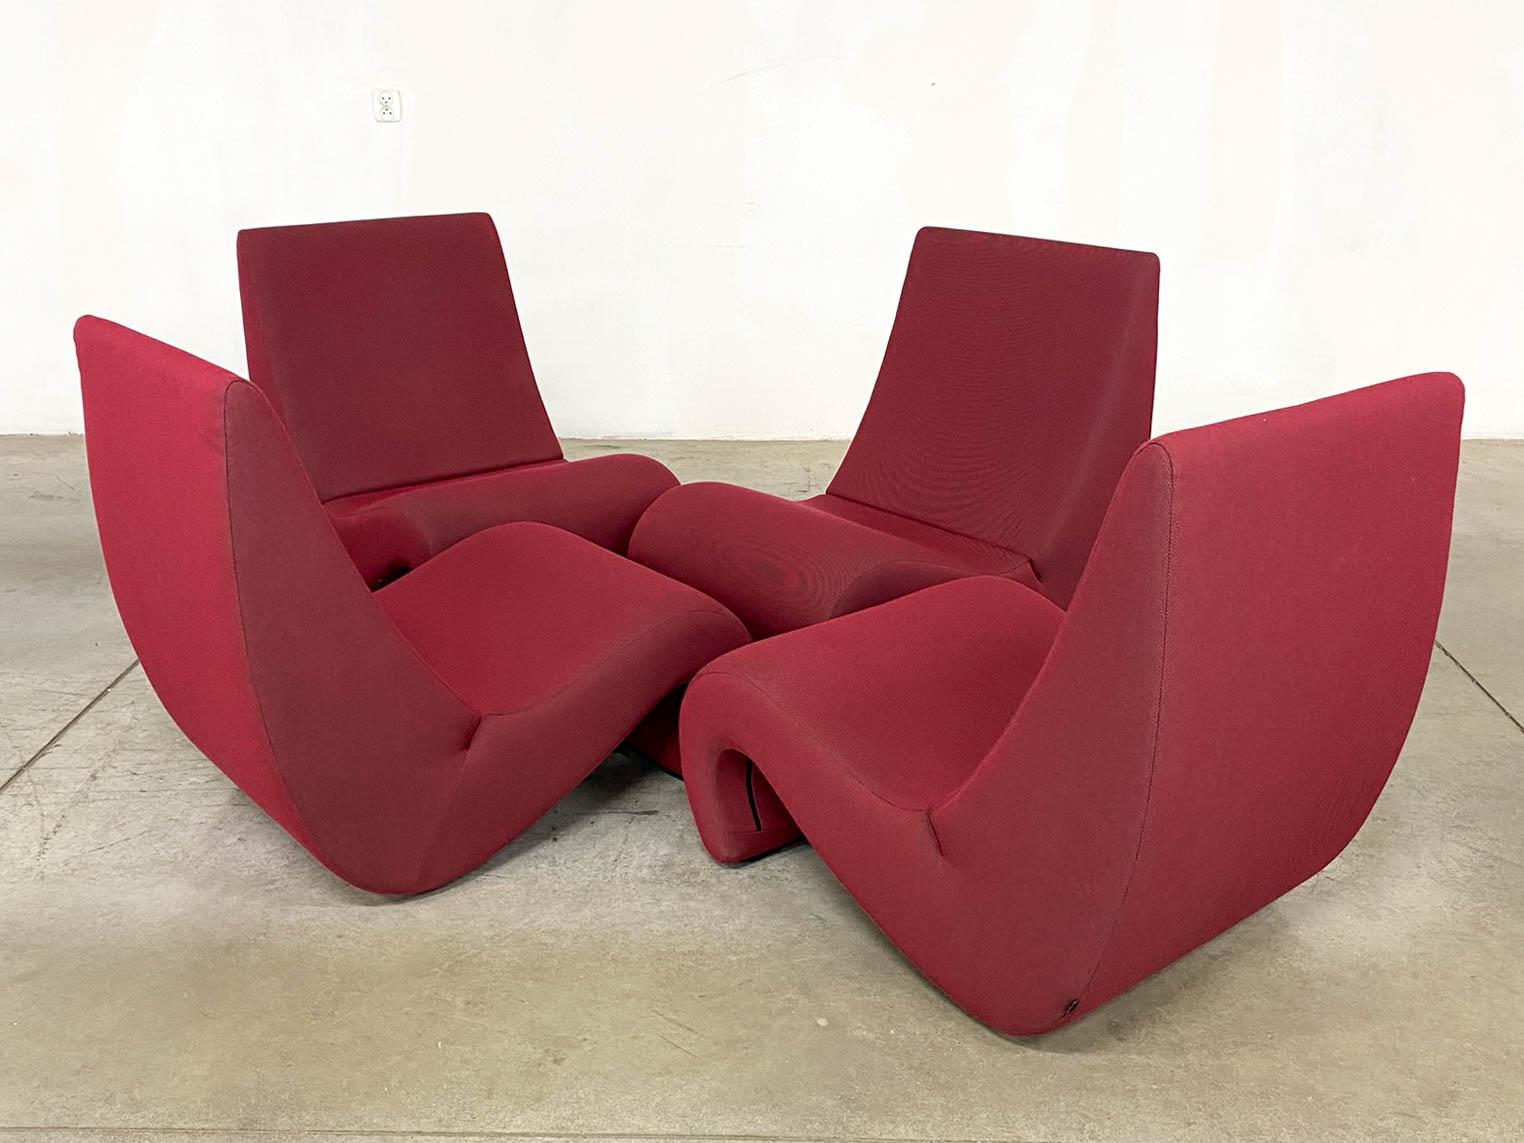 Fabric Amoebe Lounge Chair by Verner Panton for Vitra, 2000s For Sale